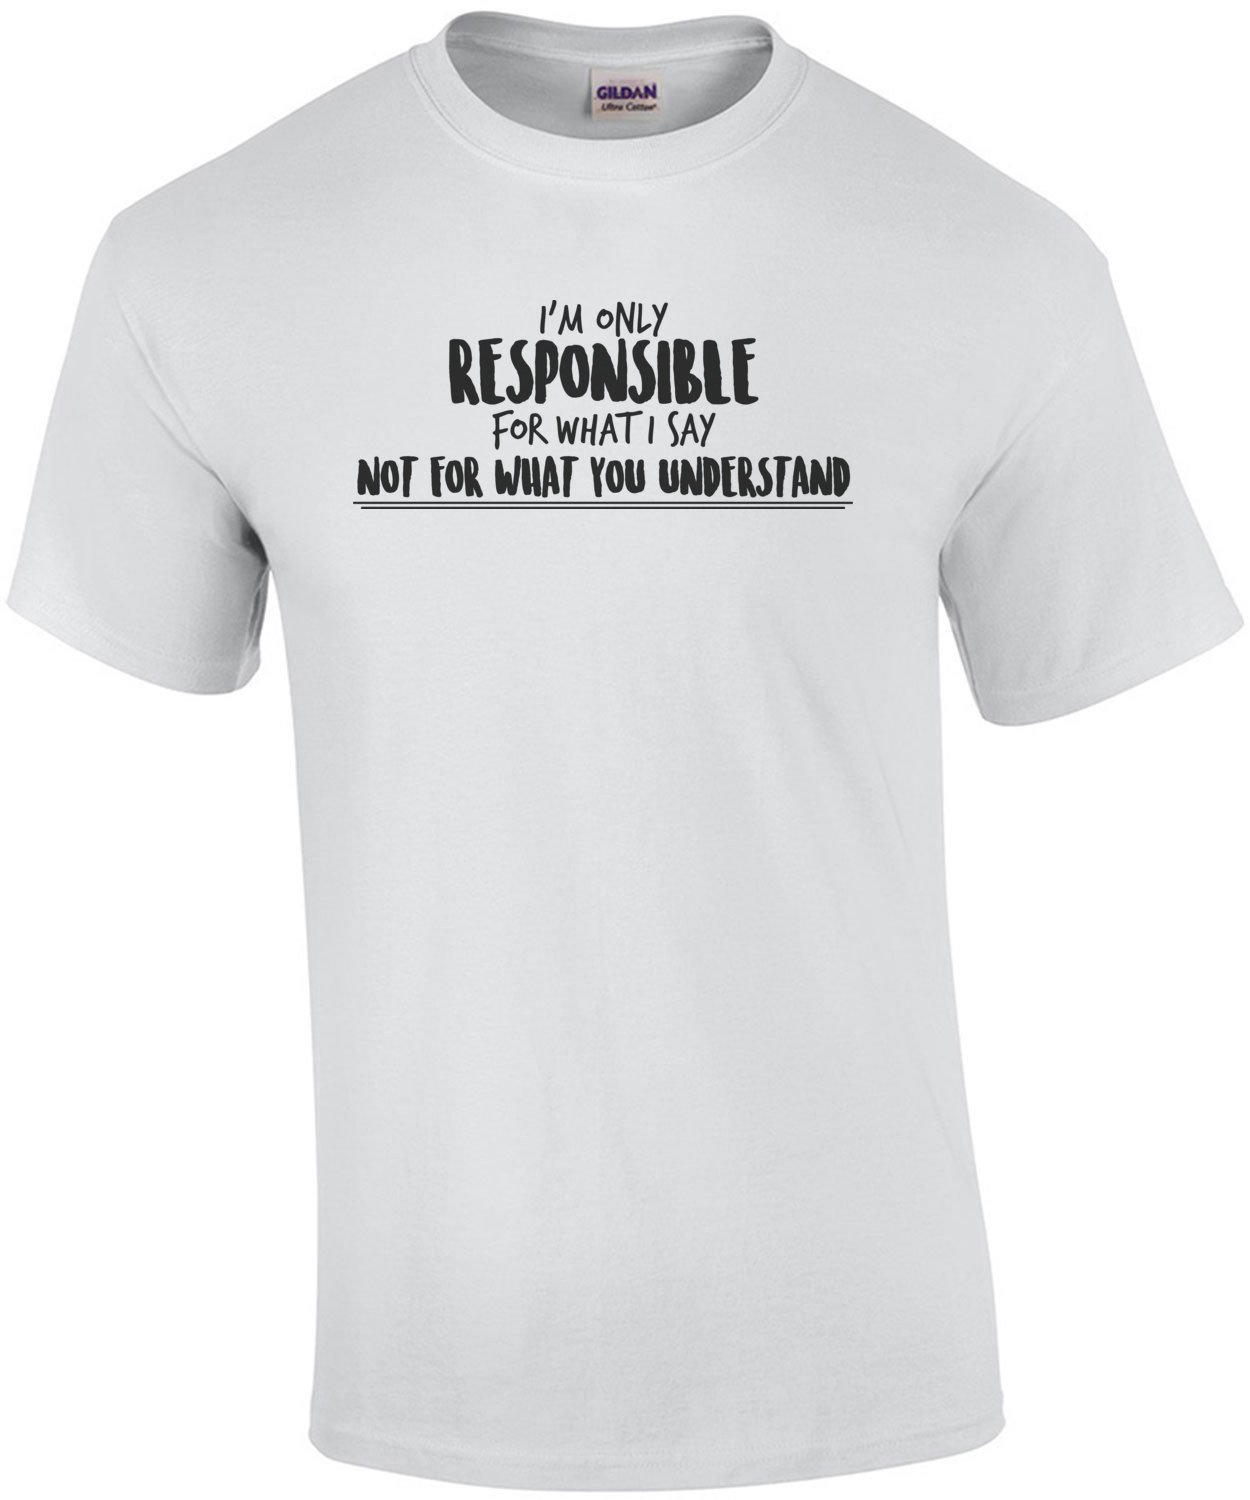 I'm only responsible for what I say not for what you understand - sarcastic t-shirt